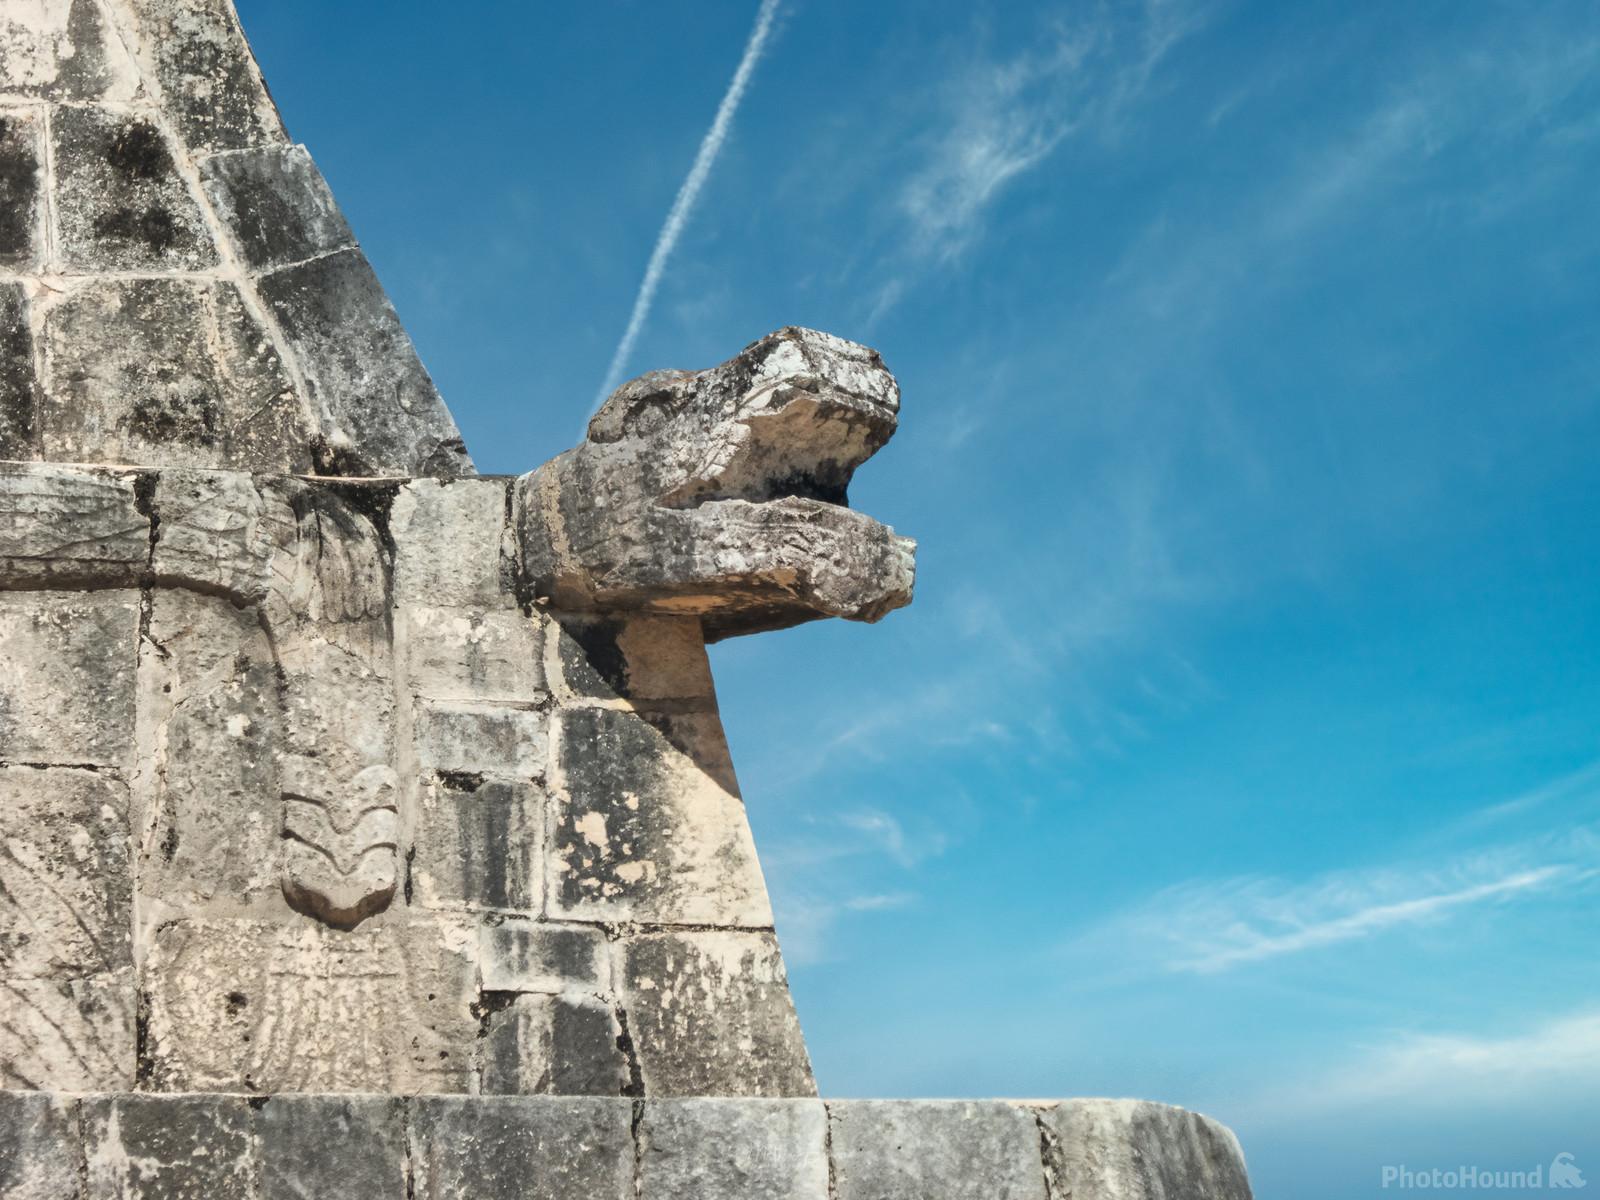 Image of Chichen Itza - El Castillo (Temple of Kukulcan) by Mathew Browne